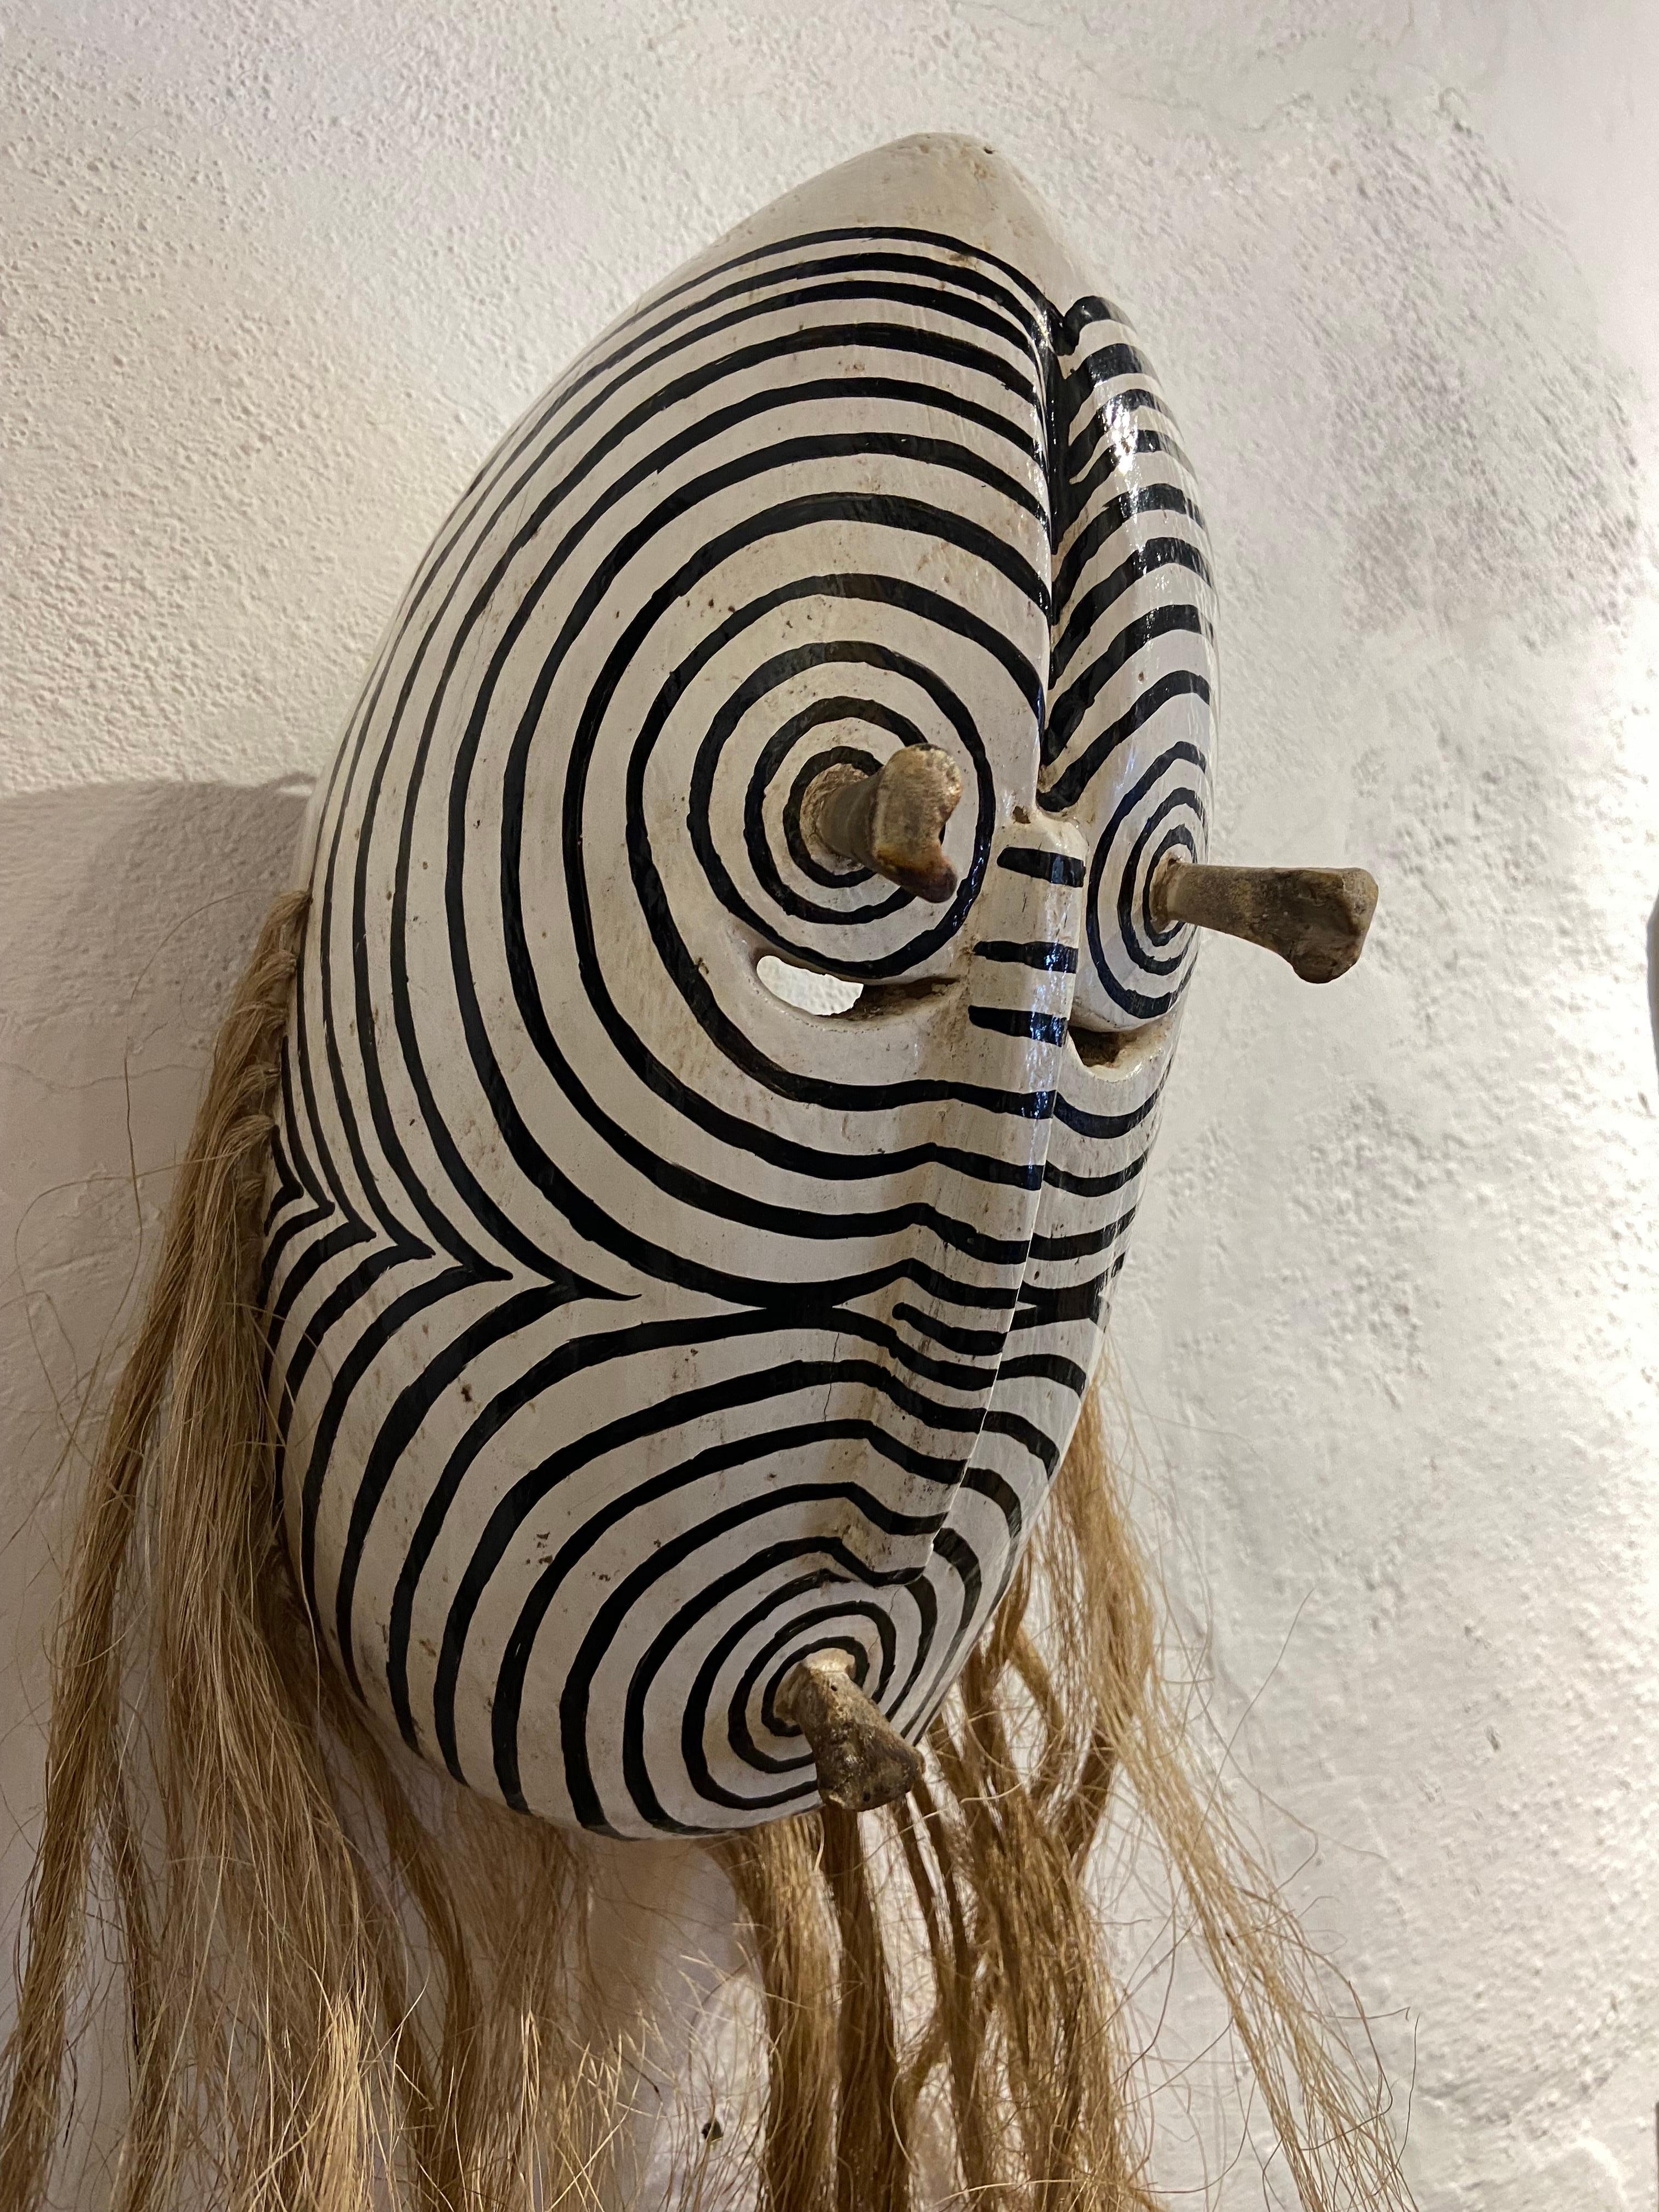 Mexican Contemporary Seri Mask from Mexico